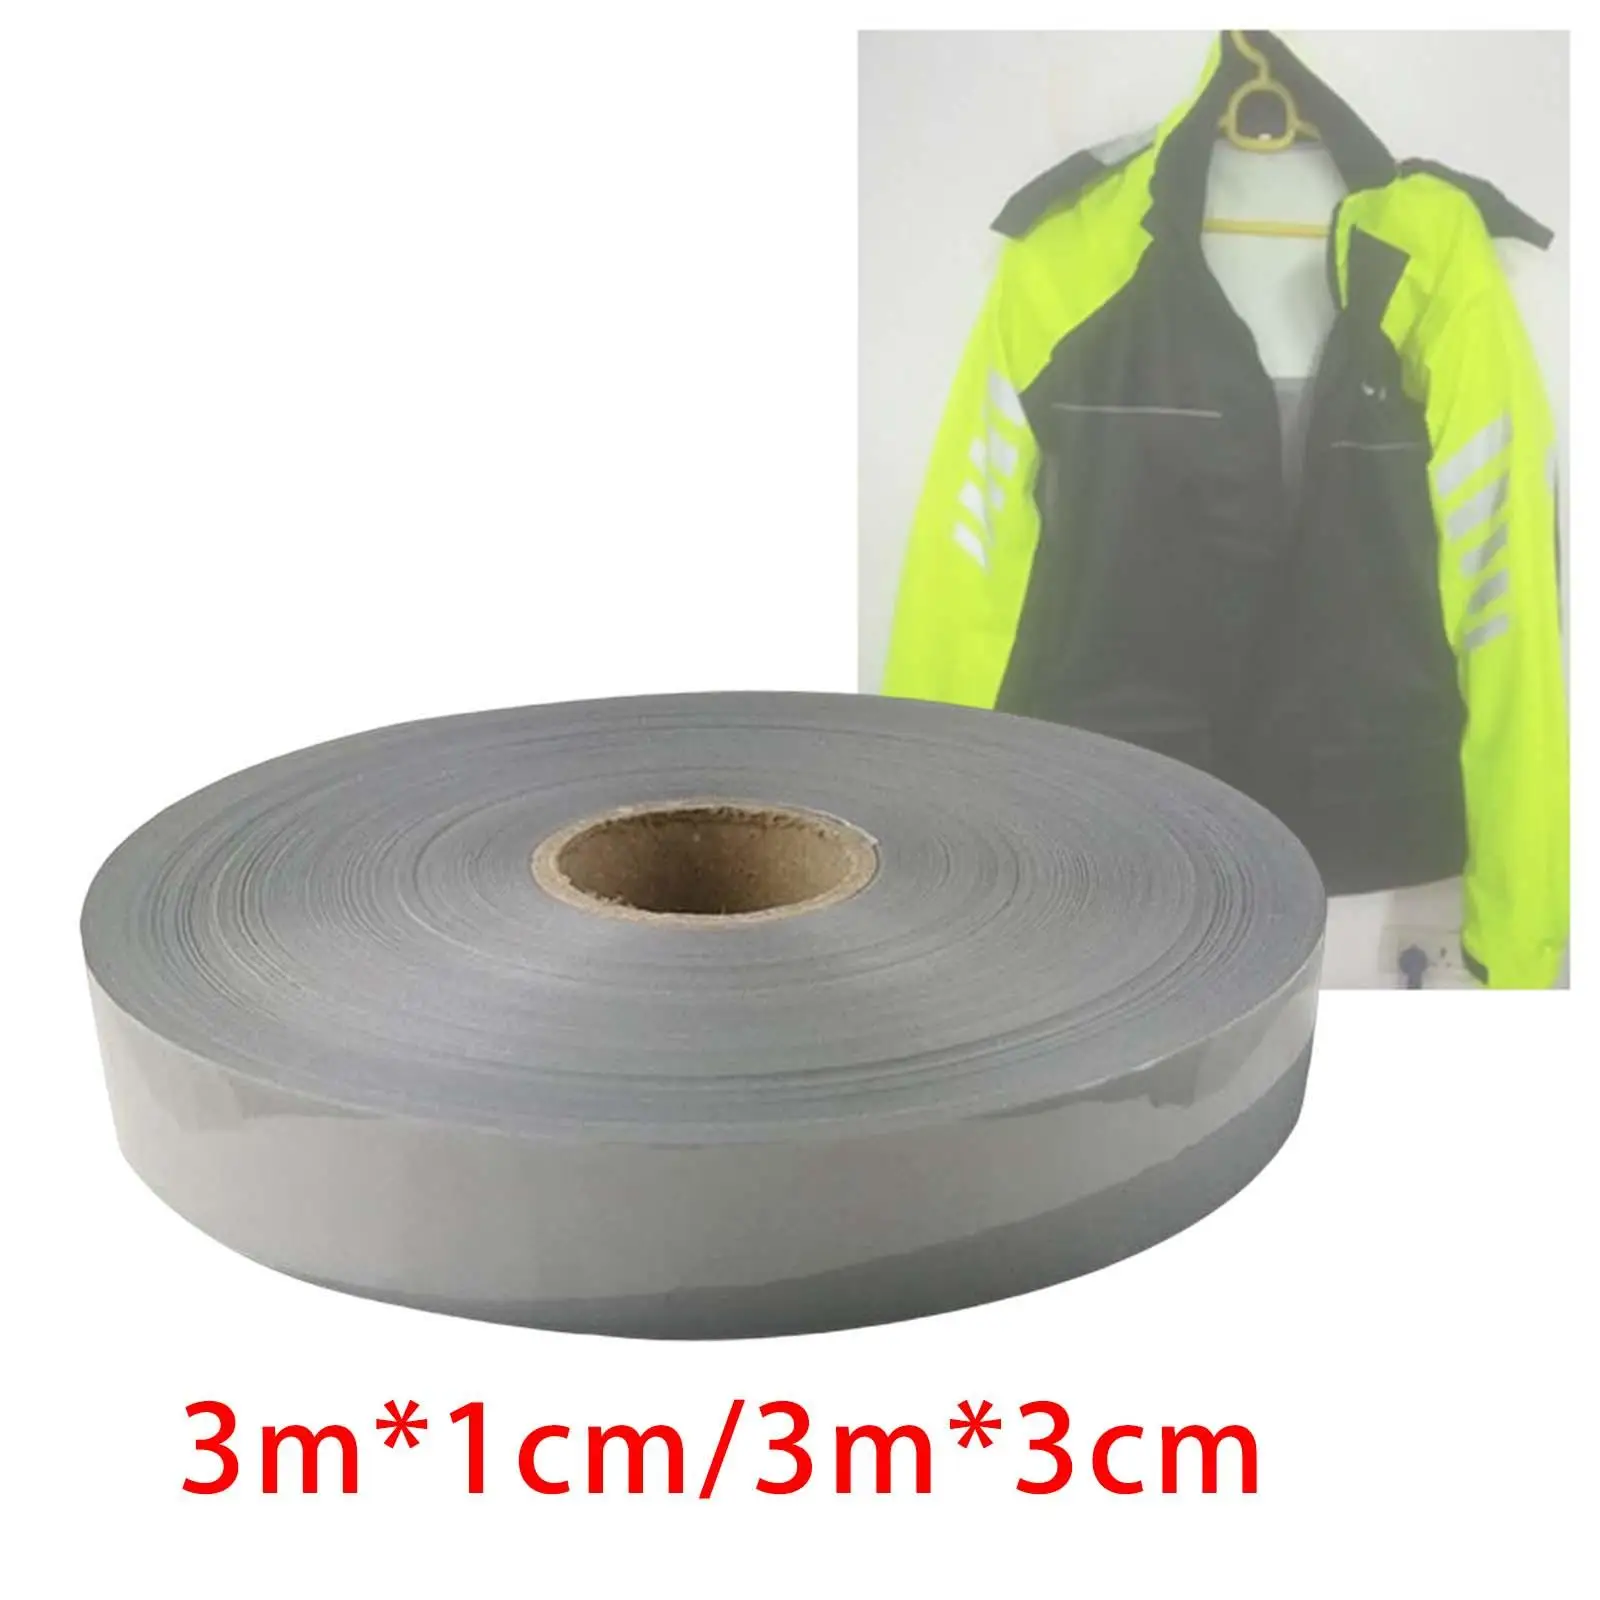 Iron on Reflective Tape Reflector Tape Durable Heat Transfer Vinyl Film for Clothes Pants